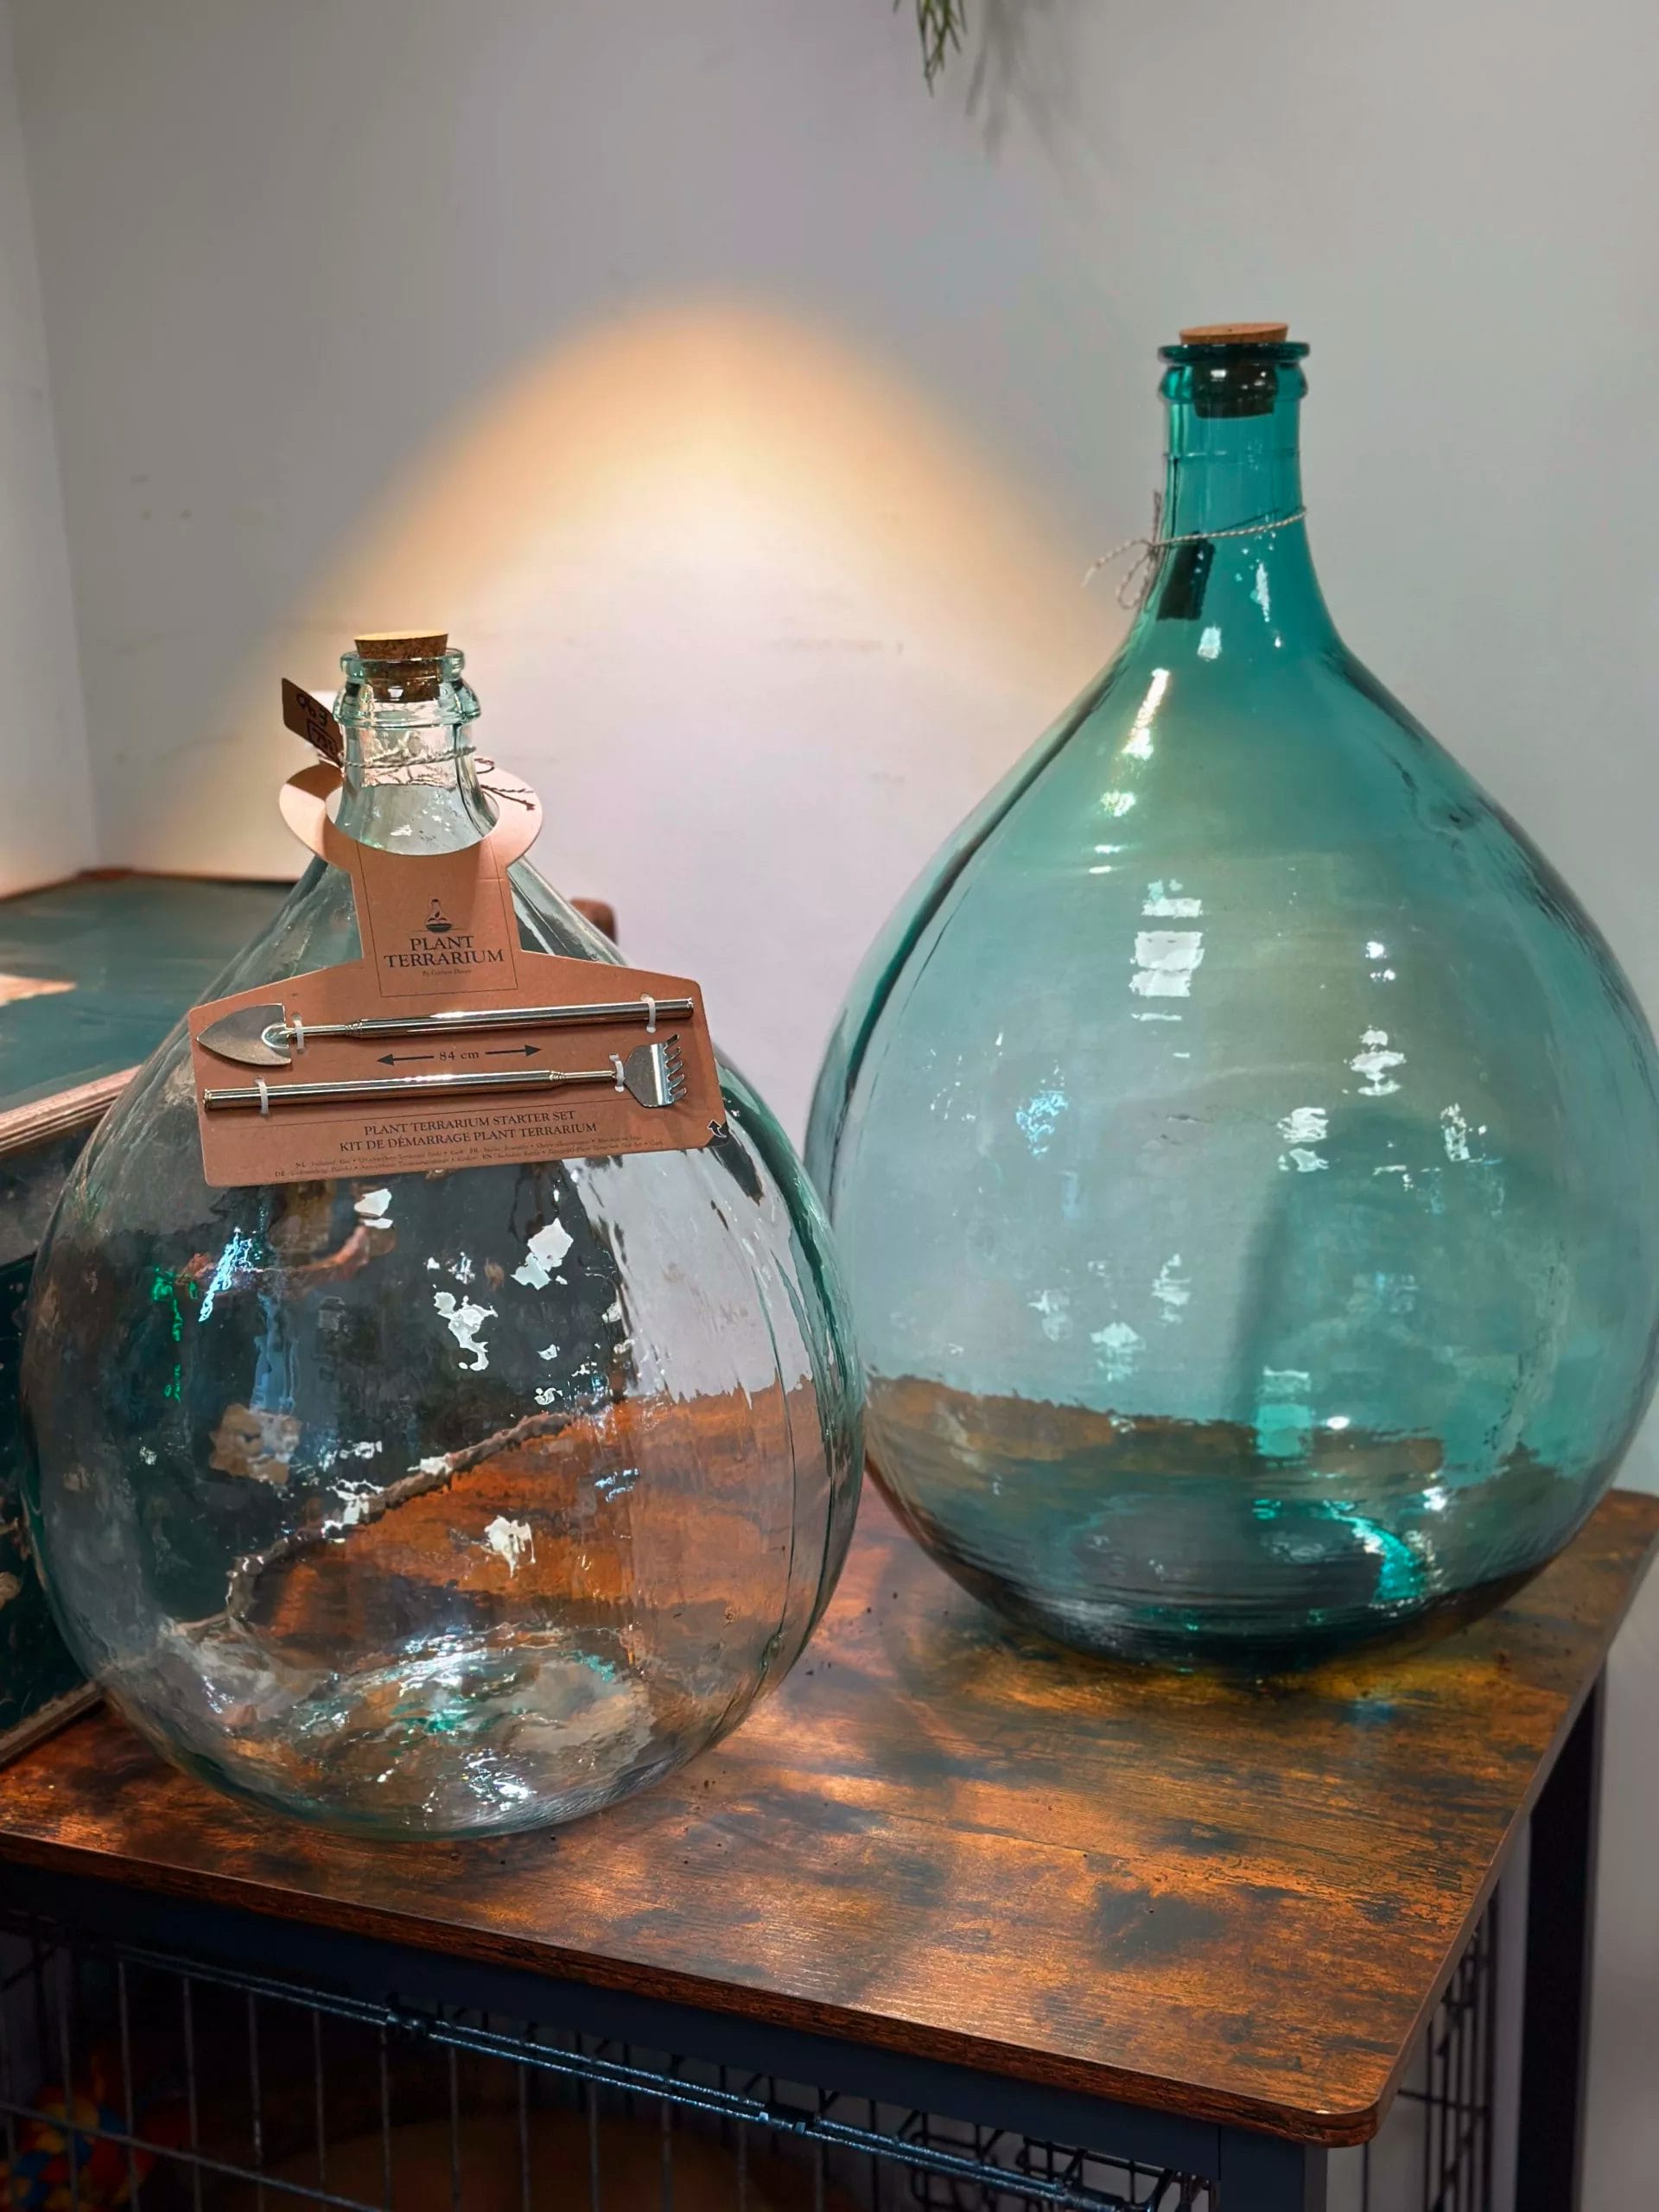 Would this huge glass jug make a good terrarium? It doesn't have a